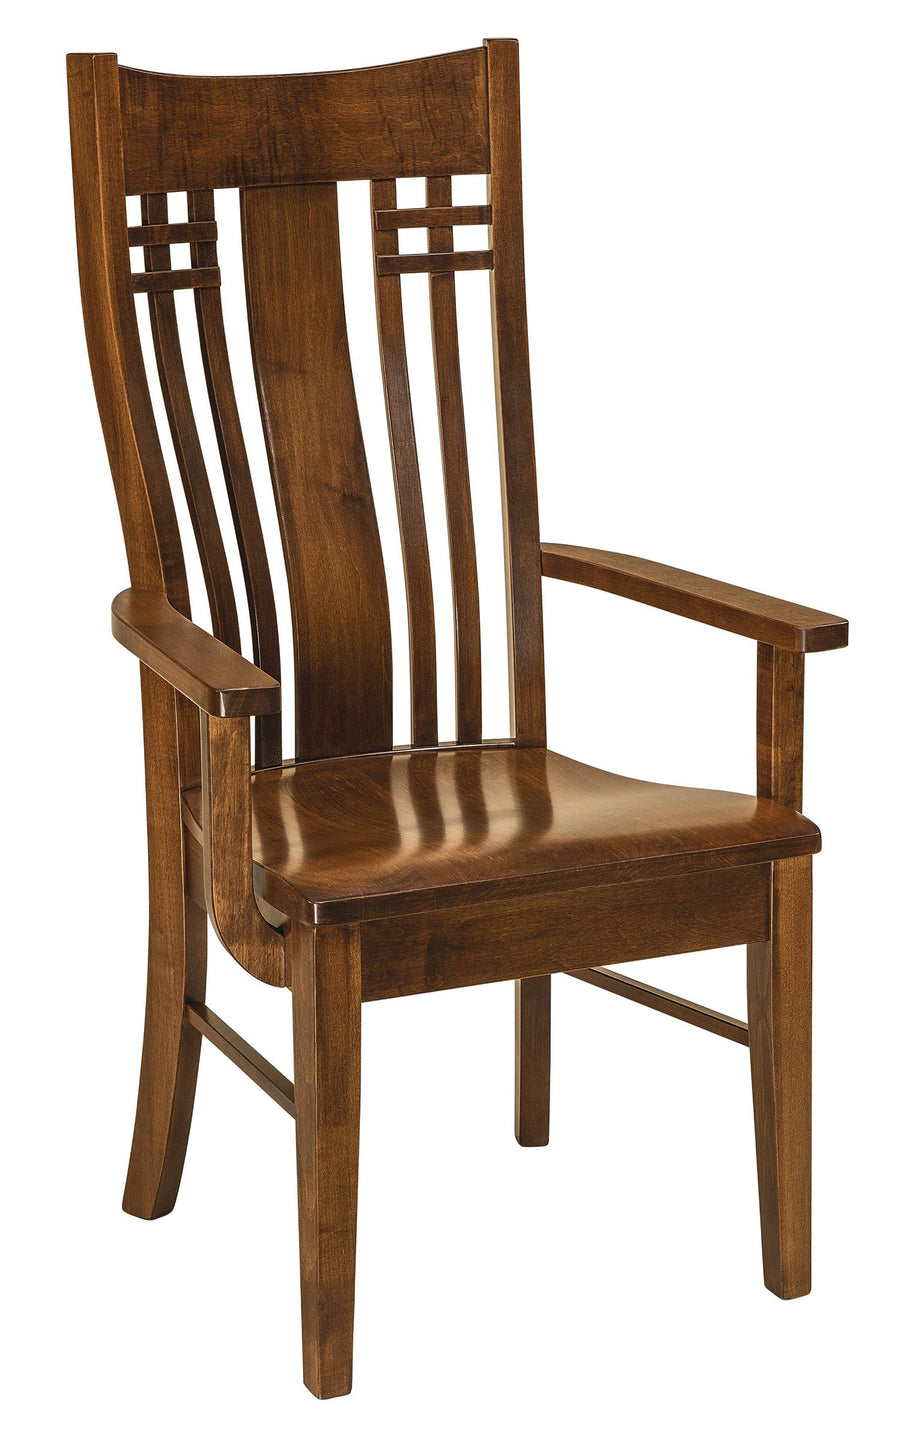 Bennett Amish Arm Chair - Foothills Amish Furniture